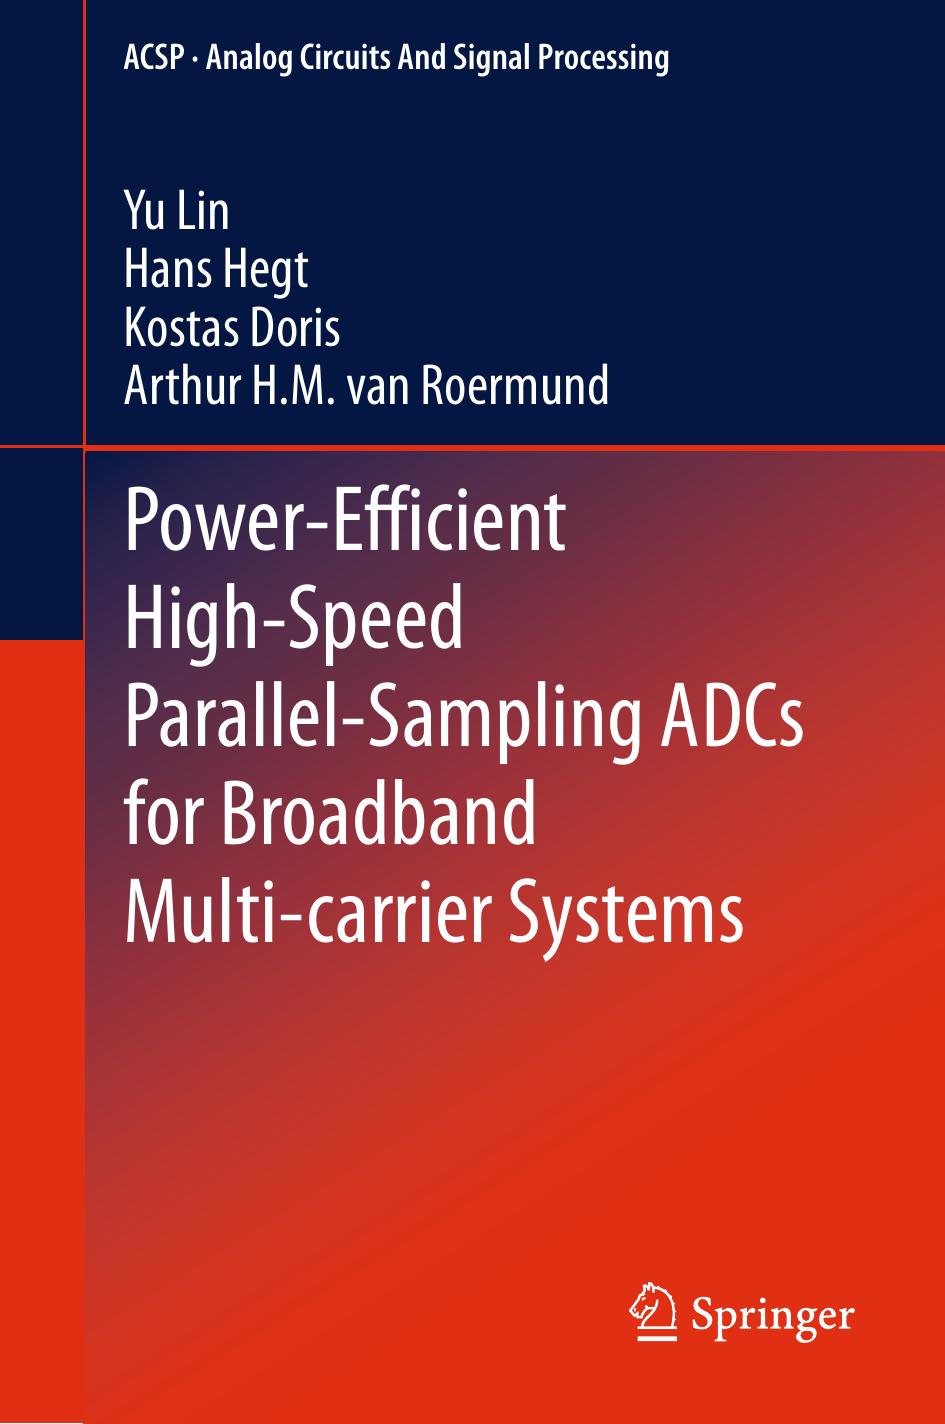 Power-Efficient High-Speed Parallel-Sampling ADCs for Broadband Multi-carrier Systems-S